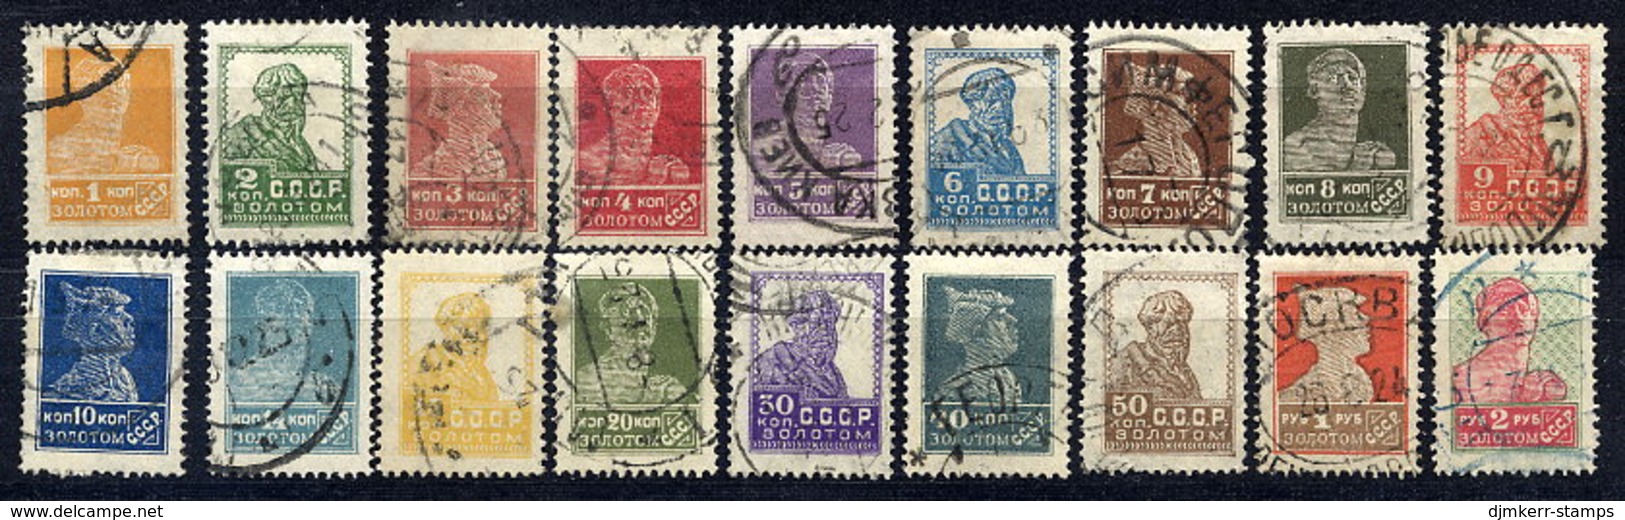 SOVIET UNION 1924-25 Definitive Complete To 2 R. Without Watermark Perforated 14½:14¾, Used.  Michel 242 I A - 259 I A. - Oblitérés